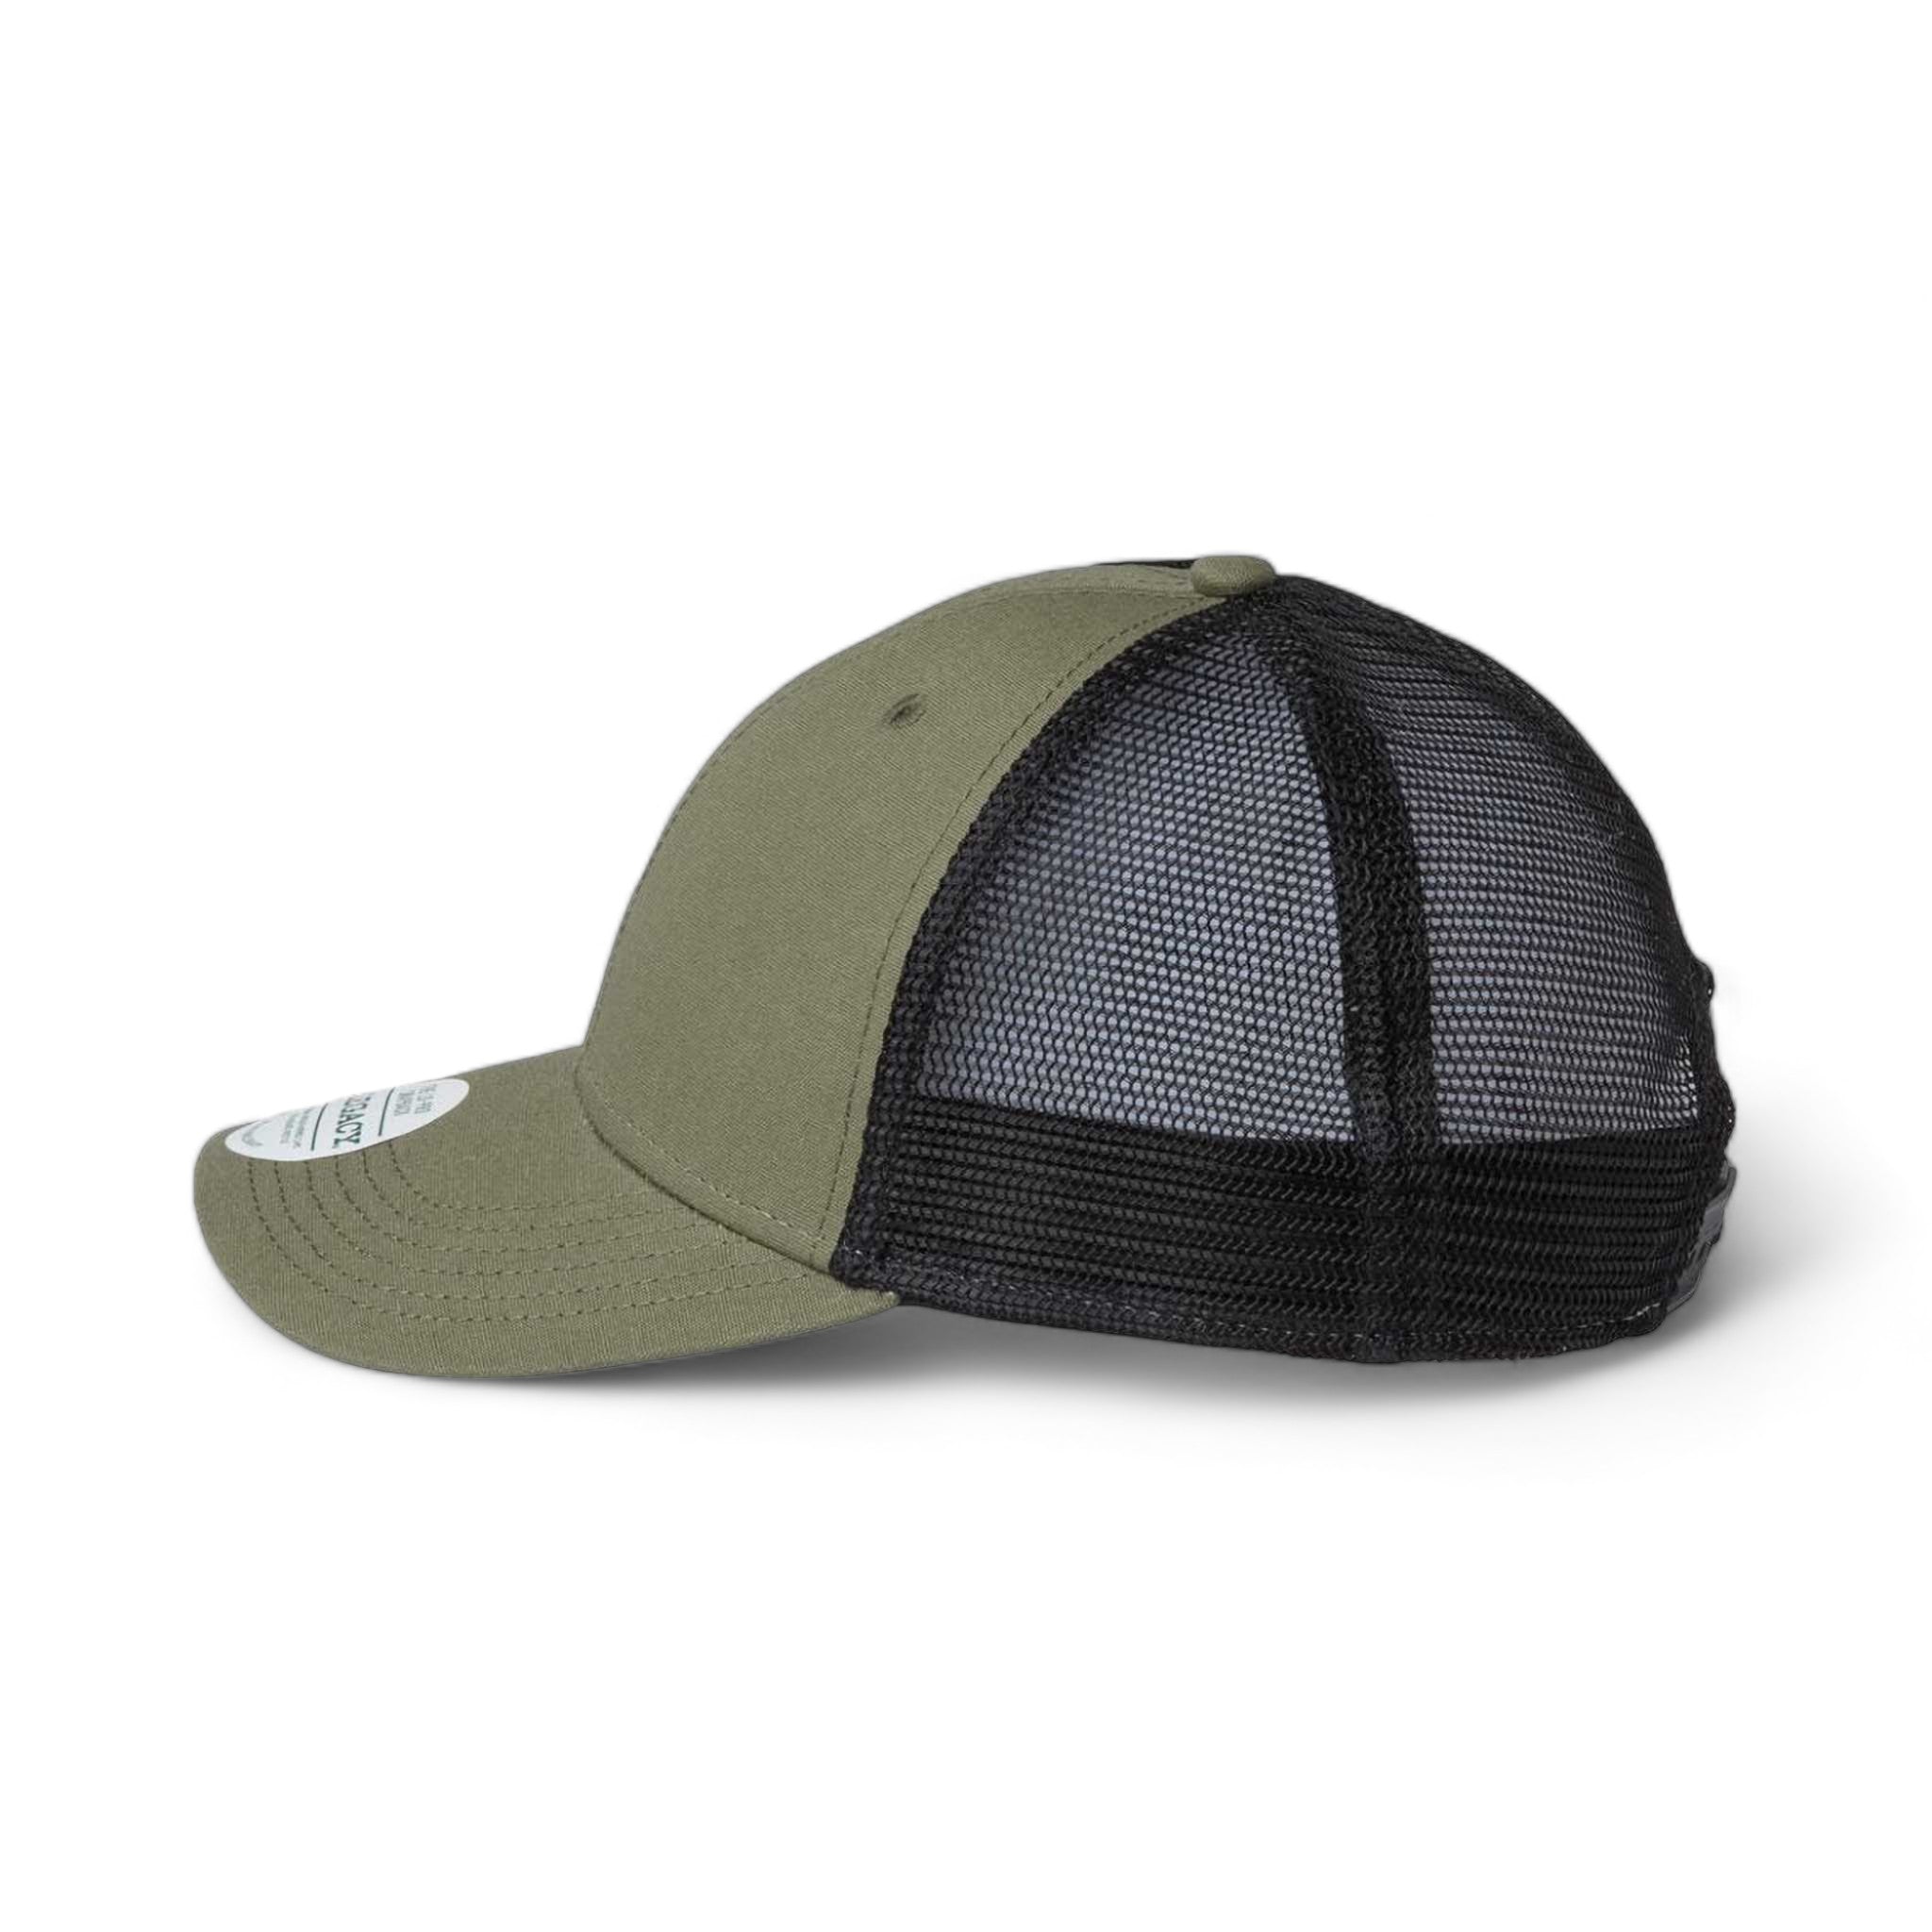 Side view of LEGACY LPS custom hat in olive and black